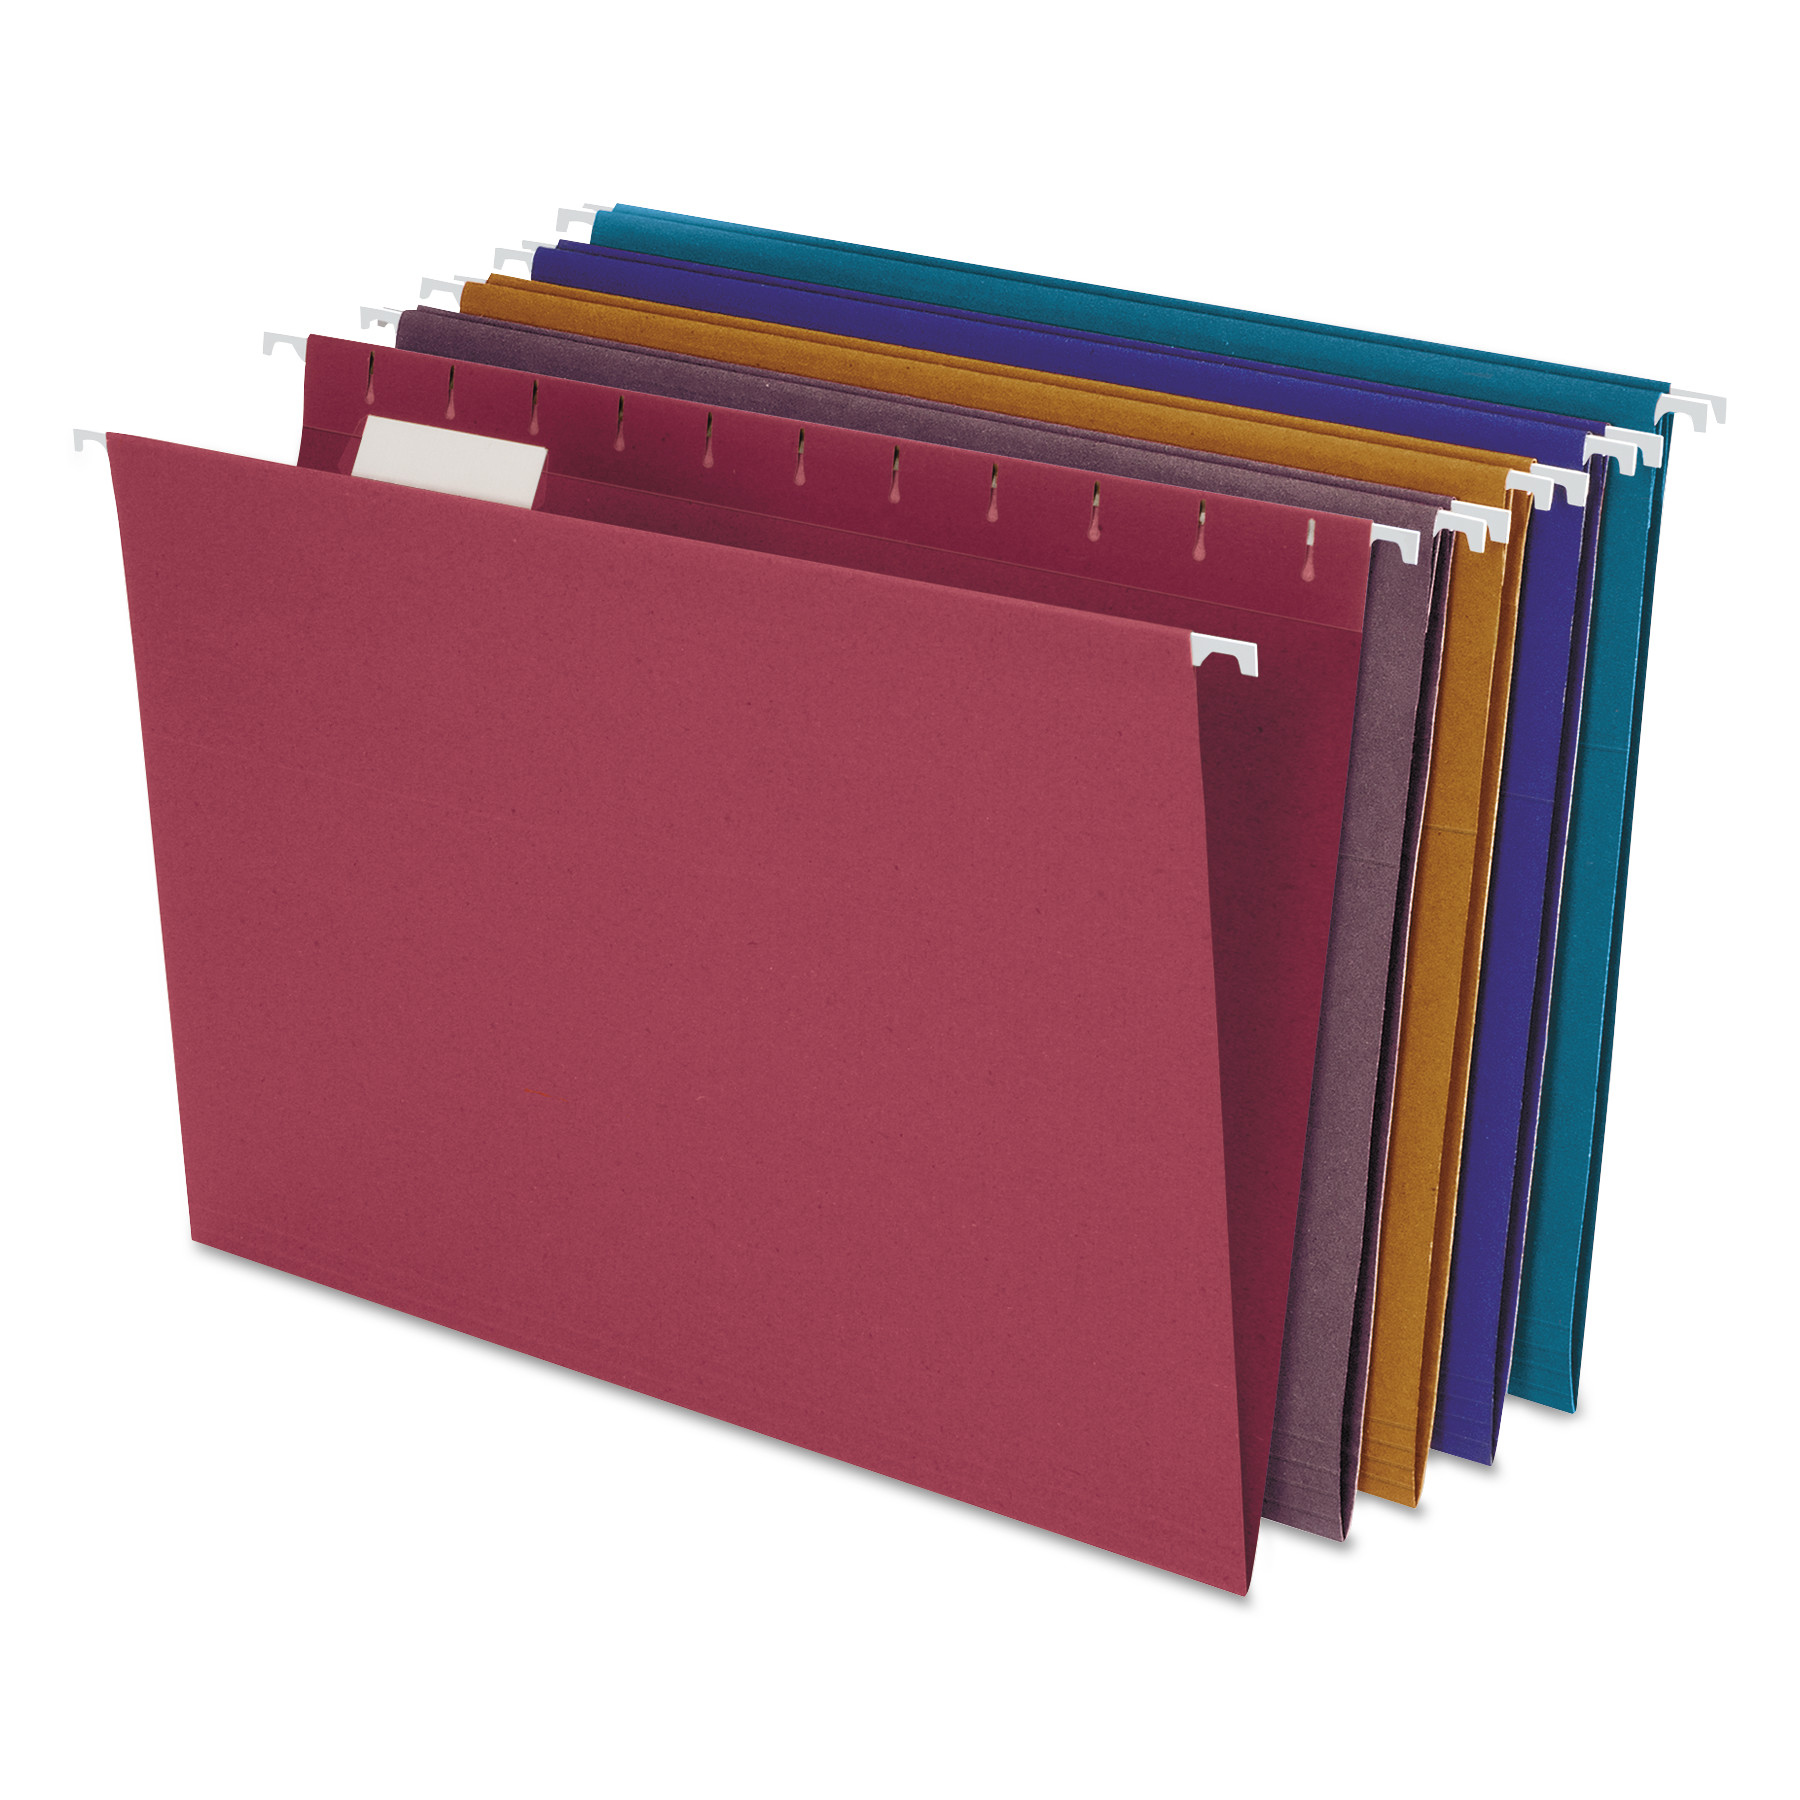  Pendaflex 35117 Earthwise by Pendaflex 100% Recycled Colored Hanging File Folders, Letter Size, 1/5-Cut Tab, Assorted, 20/Box (PFX35117) 